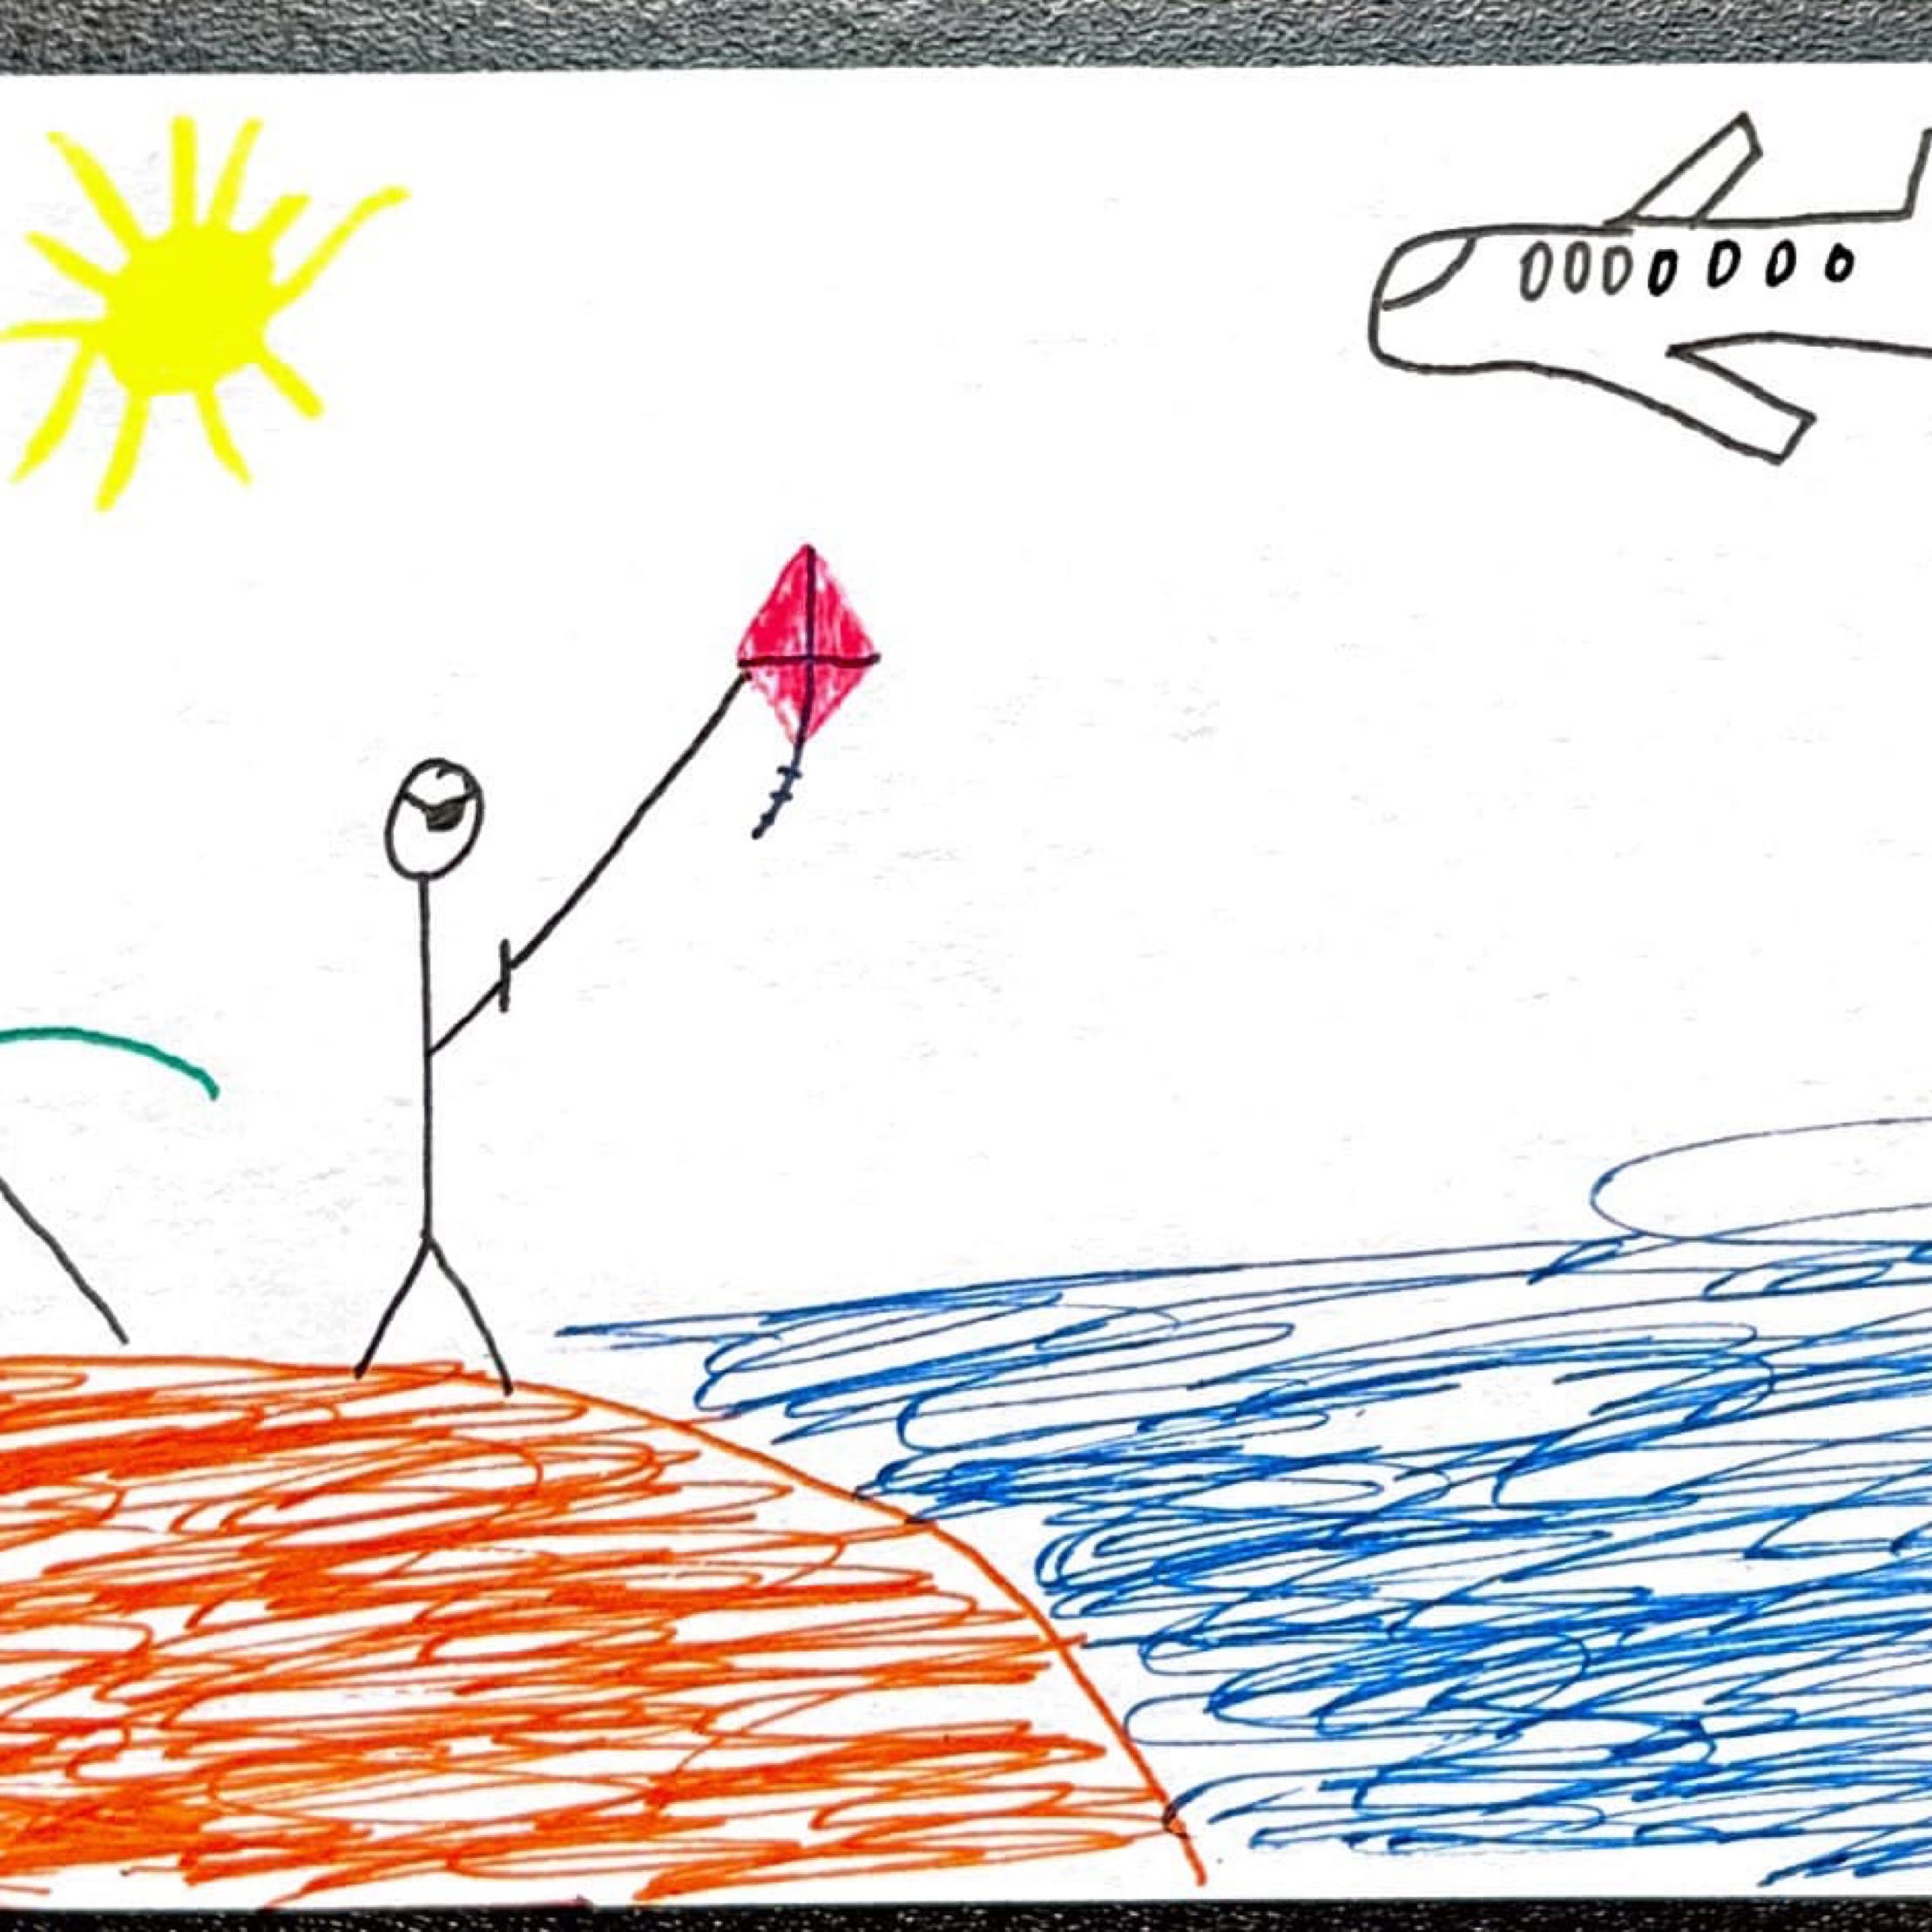 The prompt was "summer travel" and the first thing that came to mind was a plane flying over a beach.